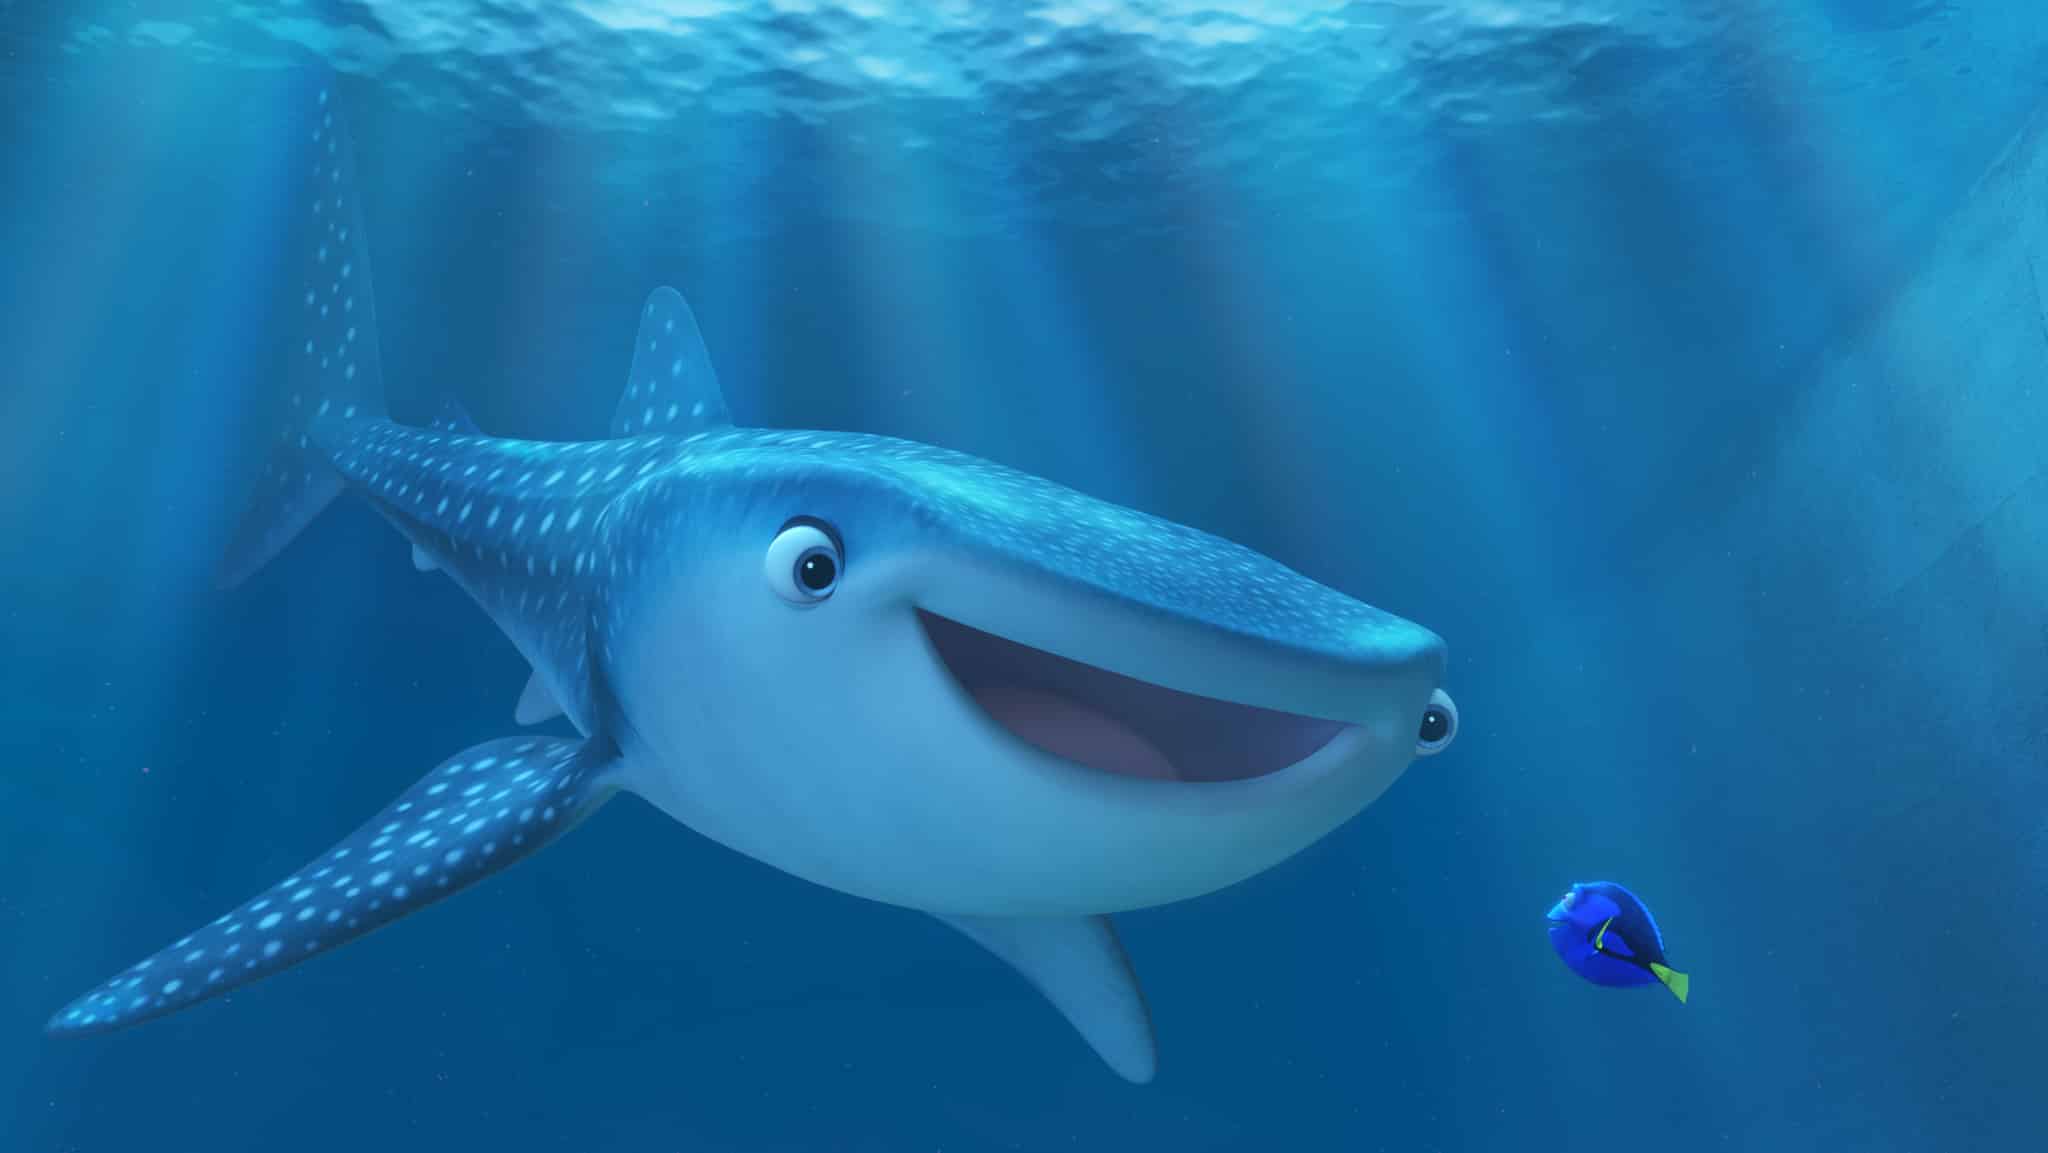 Dory and Destiny the whale in Disney Pixar's Finding Dory.